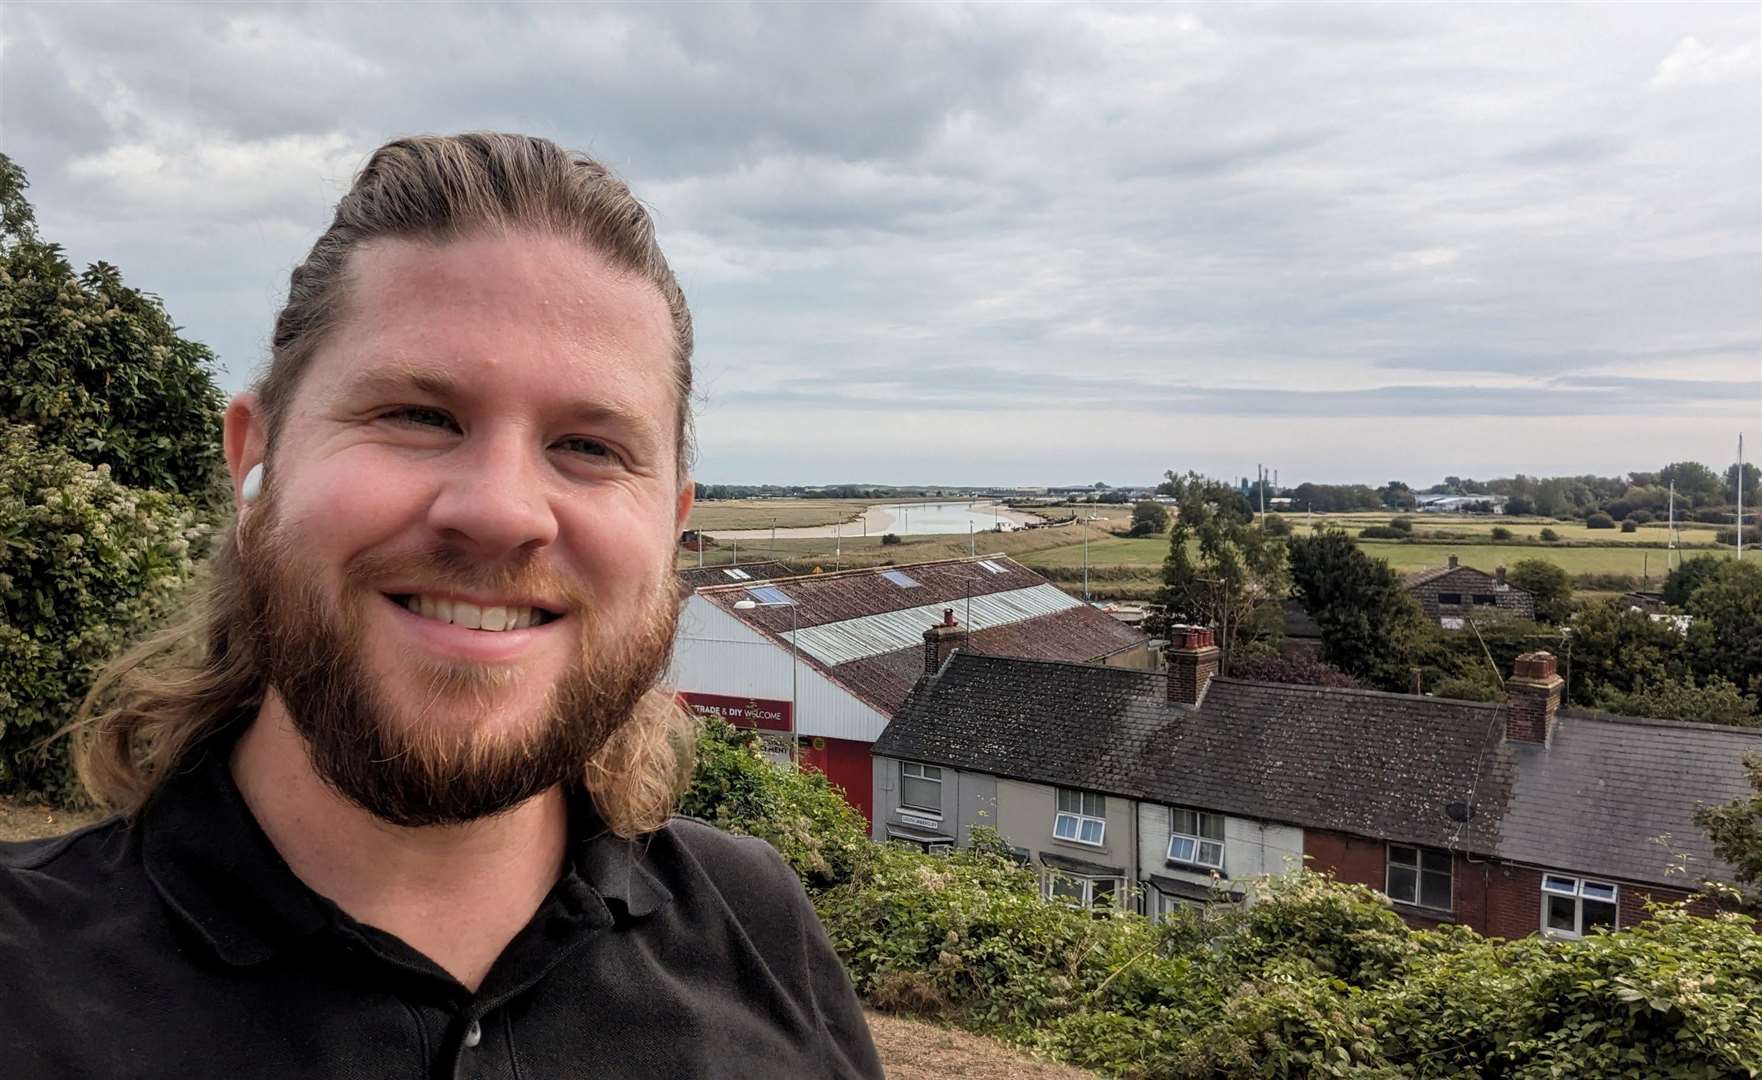 Rhys Griffiths takes in the views in Rye